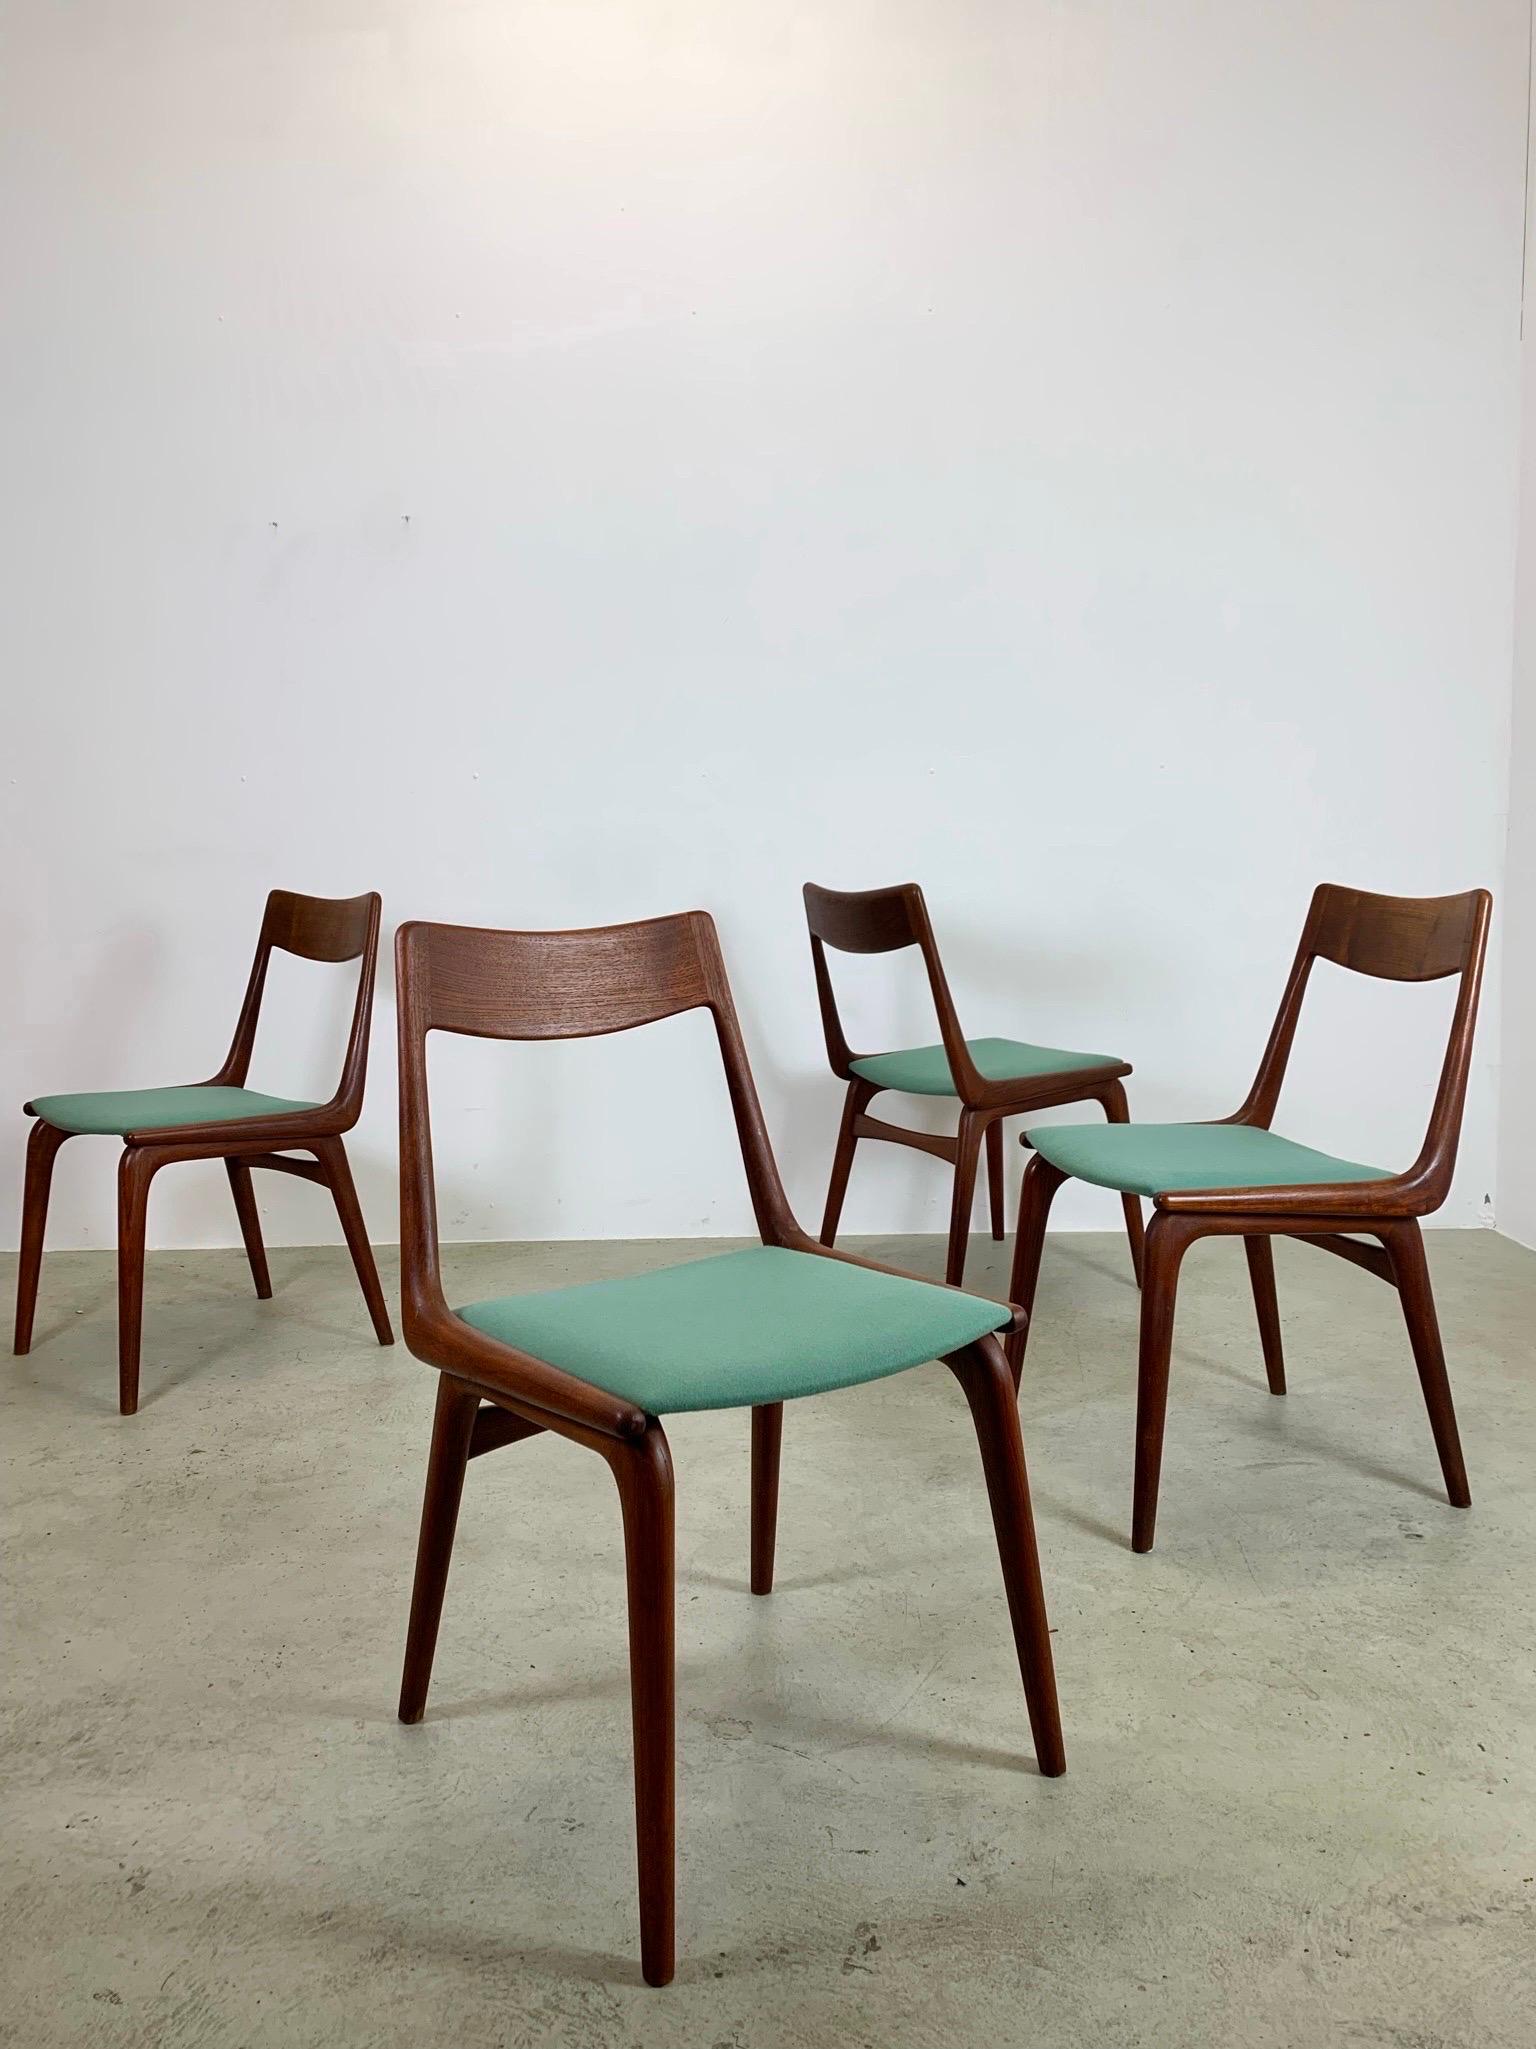 Faux Leather 4x Danish Teak Boomerang Chairs by Alfred Christensen, 1950s restored For Sale